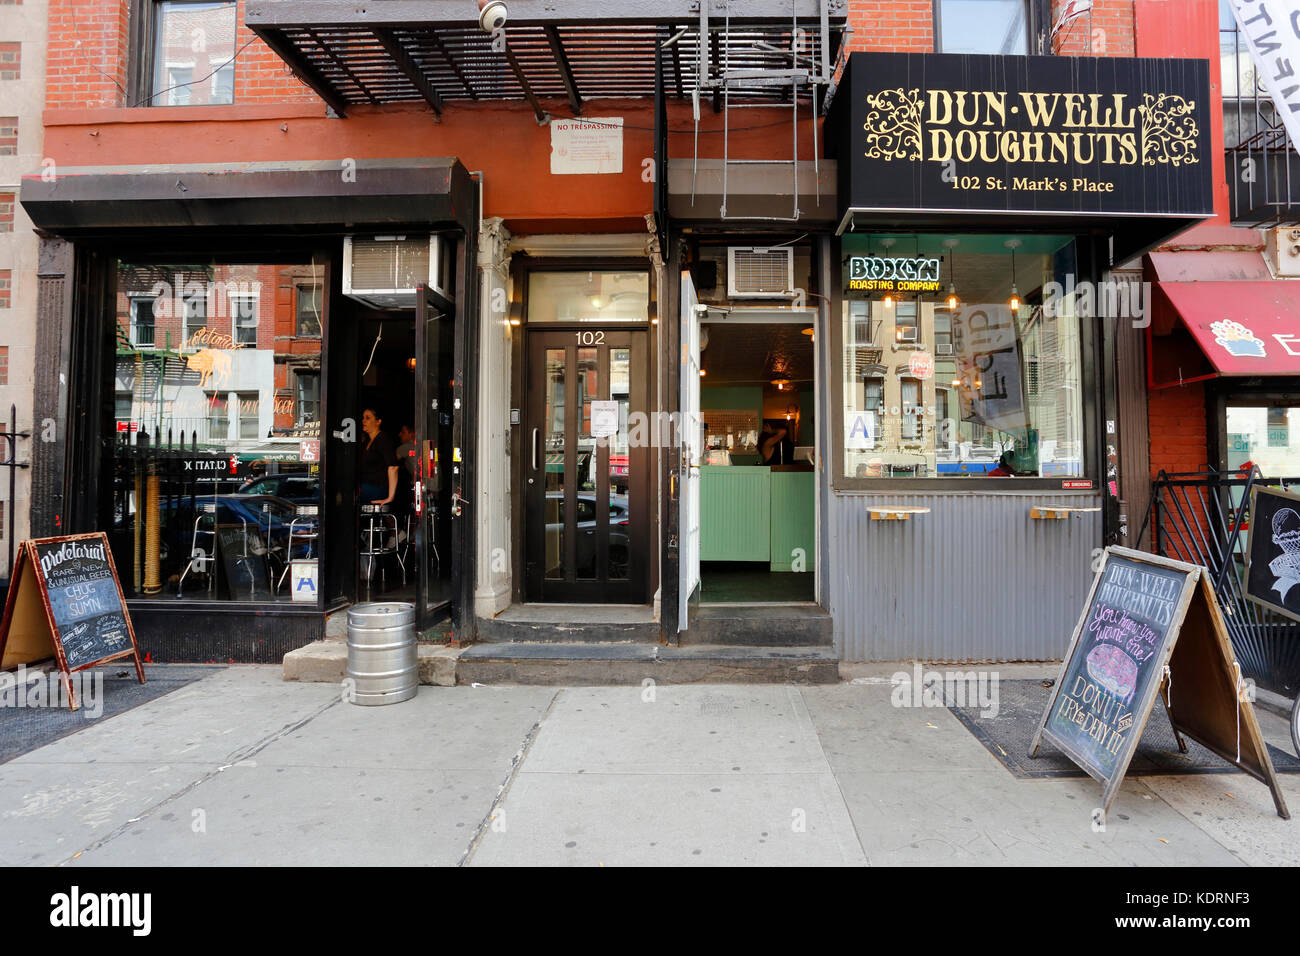 [historical storefront] Dun-Well Doughnuts, 102 St Marks Place, New York, NY. exterior storefront of a donut shop in the East Village. Stock Photo